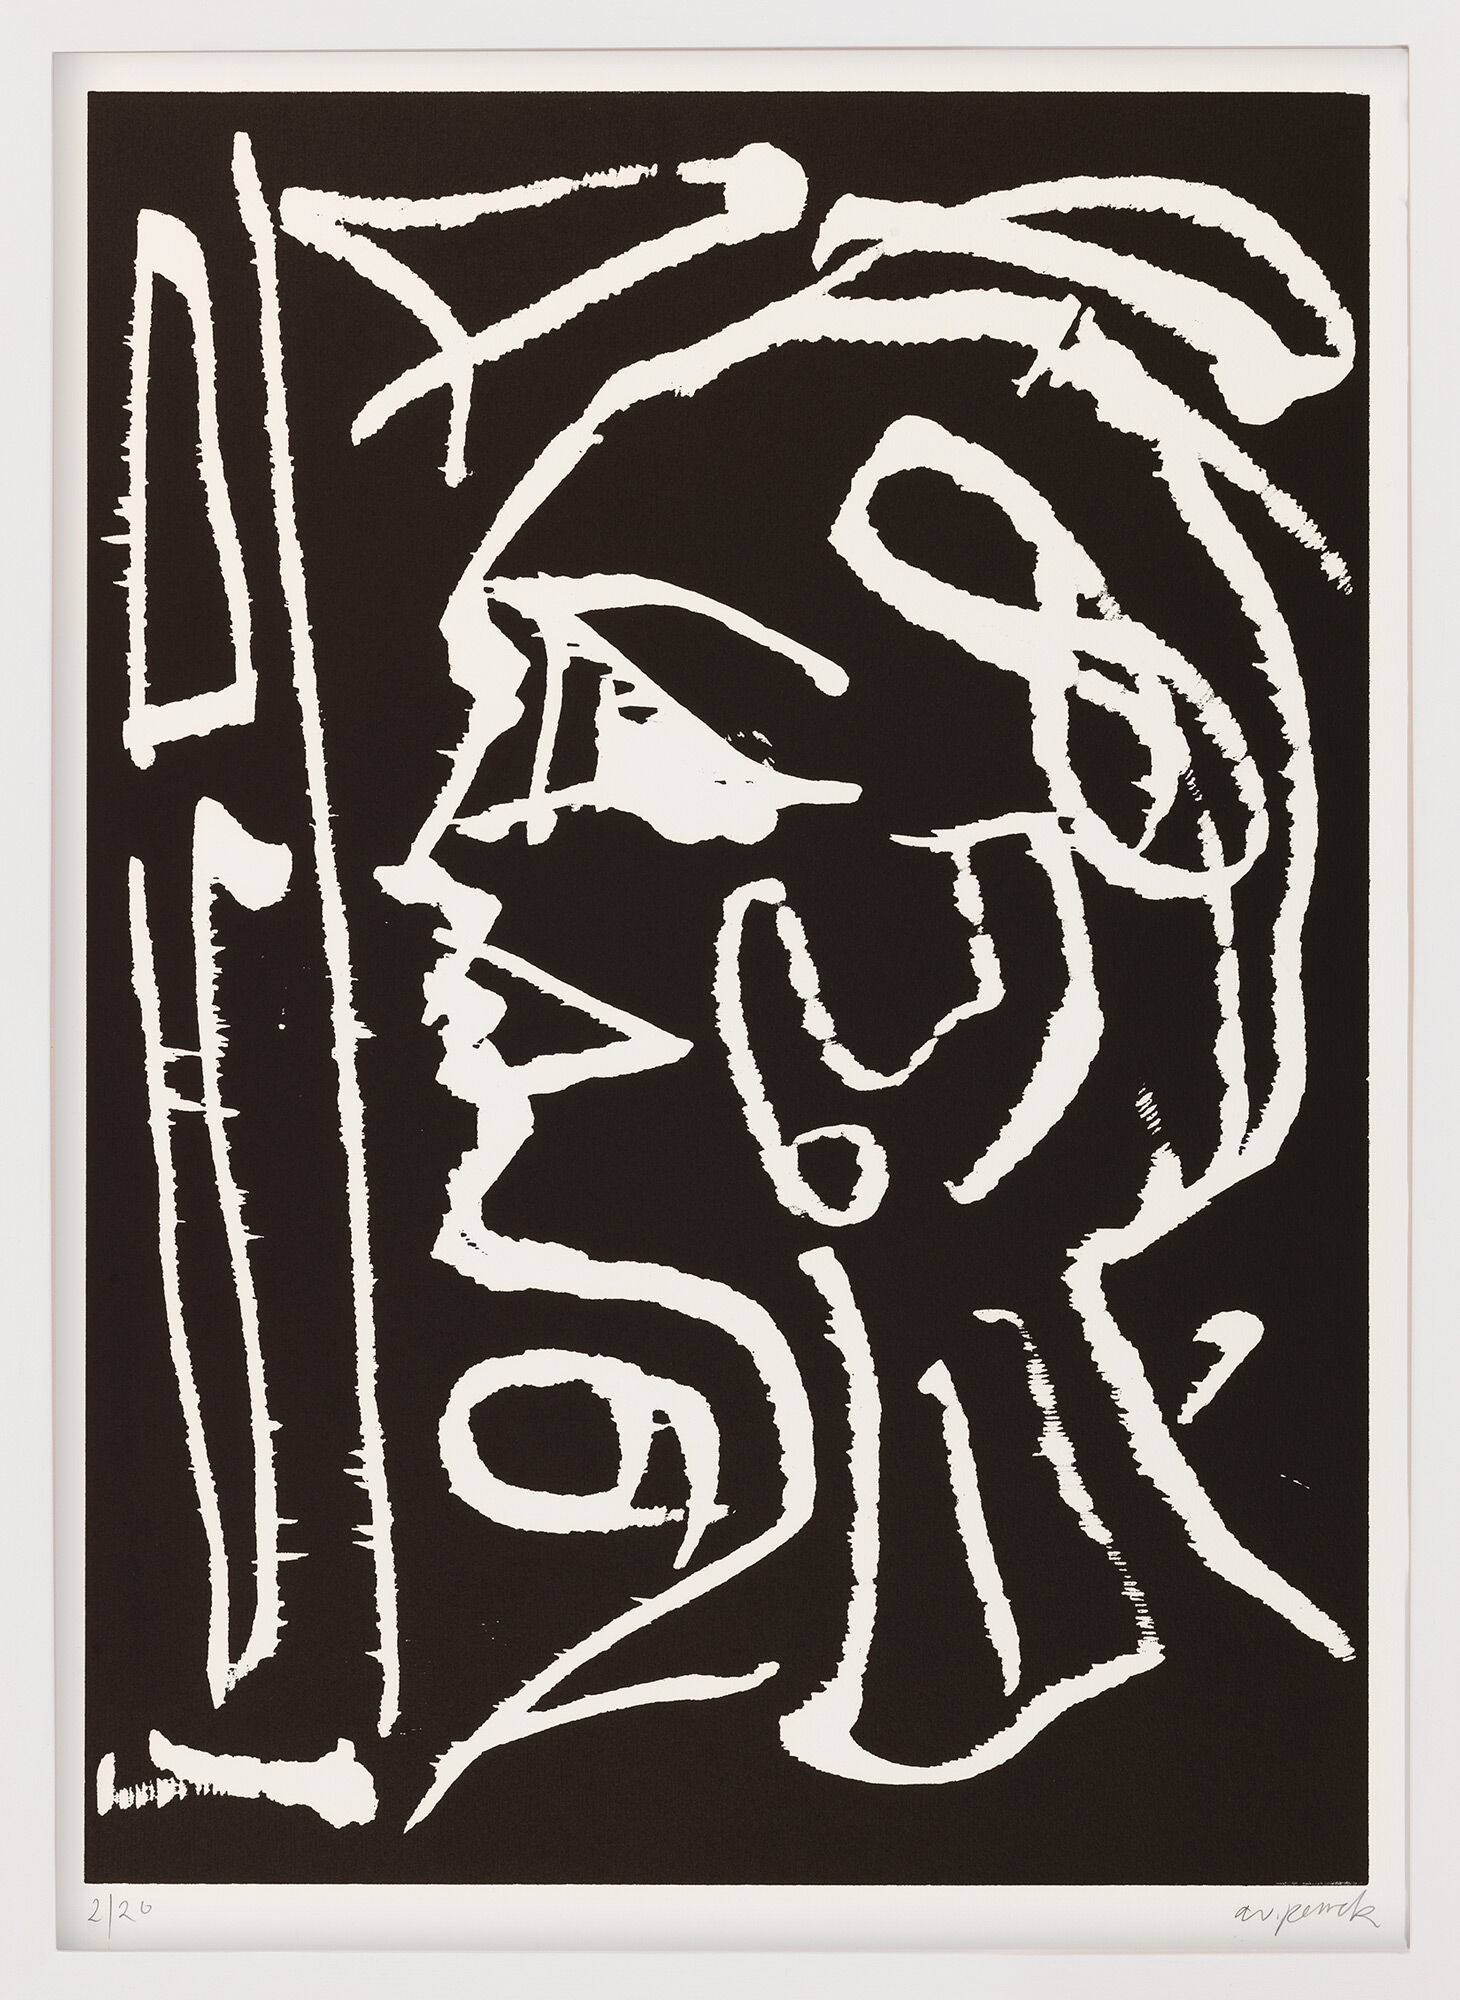 Picture "Head at the Window" (1990) by A. R. Penck